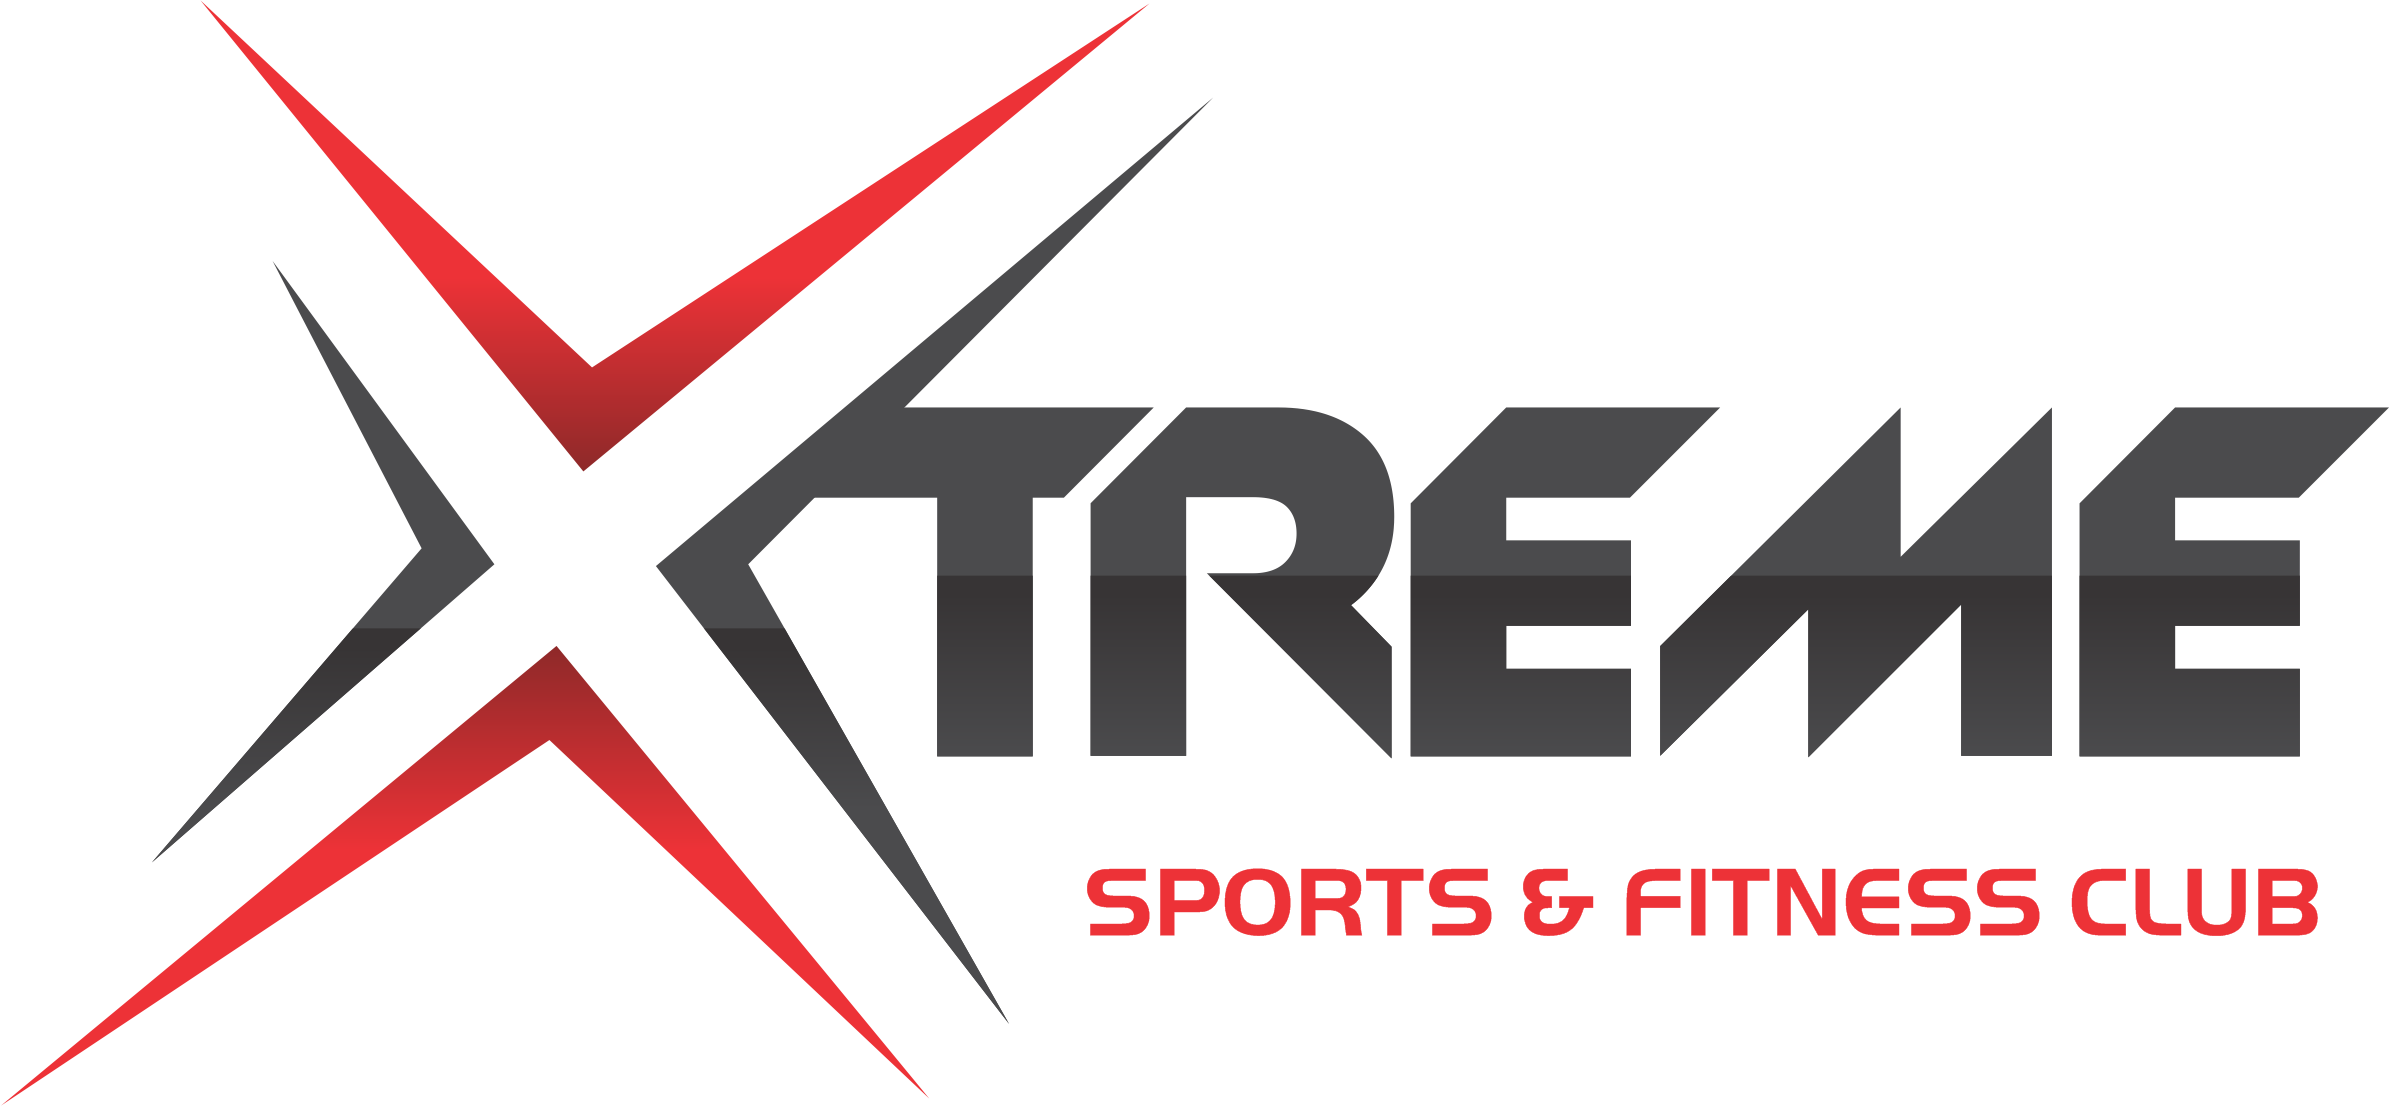 Xtreme Sports and Fitness Club|Salon|Active Life